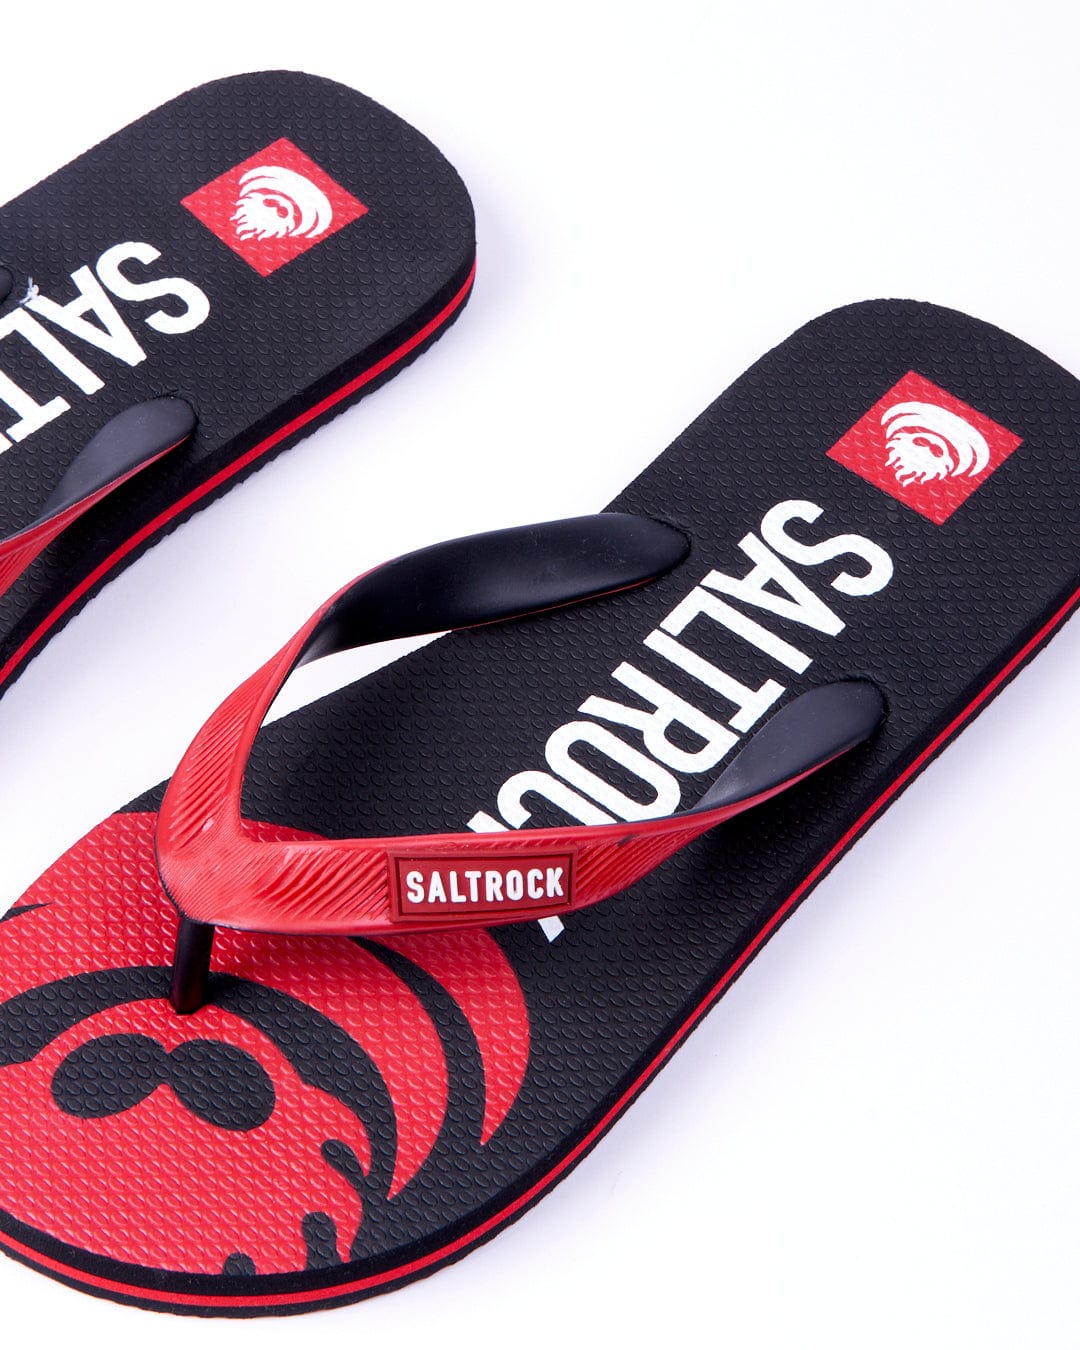 A pair of Saltrock Corp Flame flip-flops with red footbeds featuring a large flamehead logo and black straps, set against a white background.